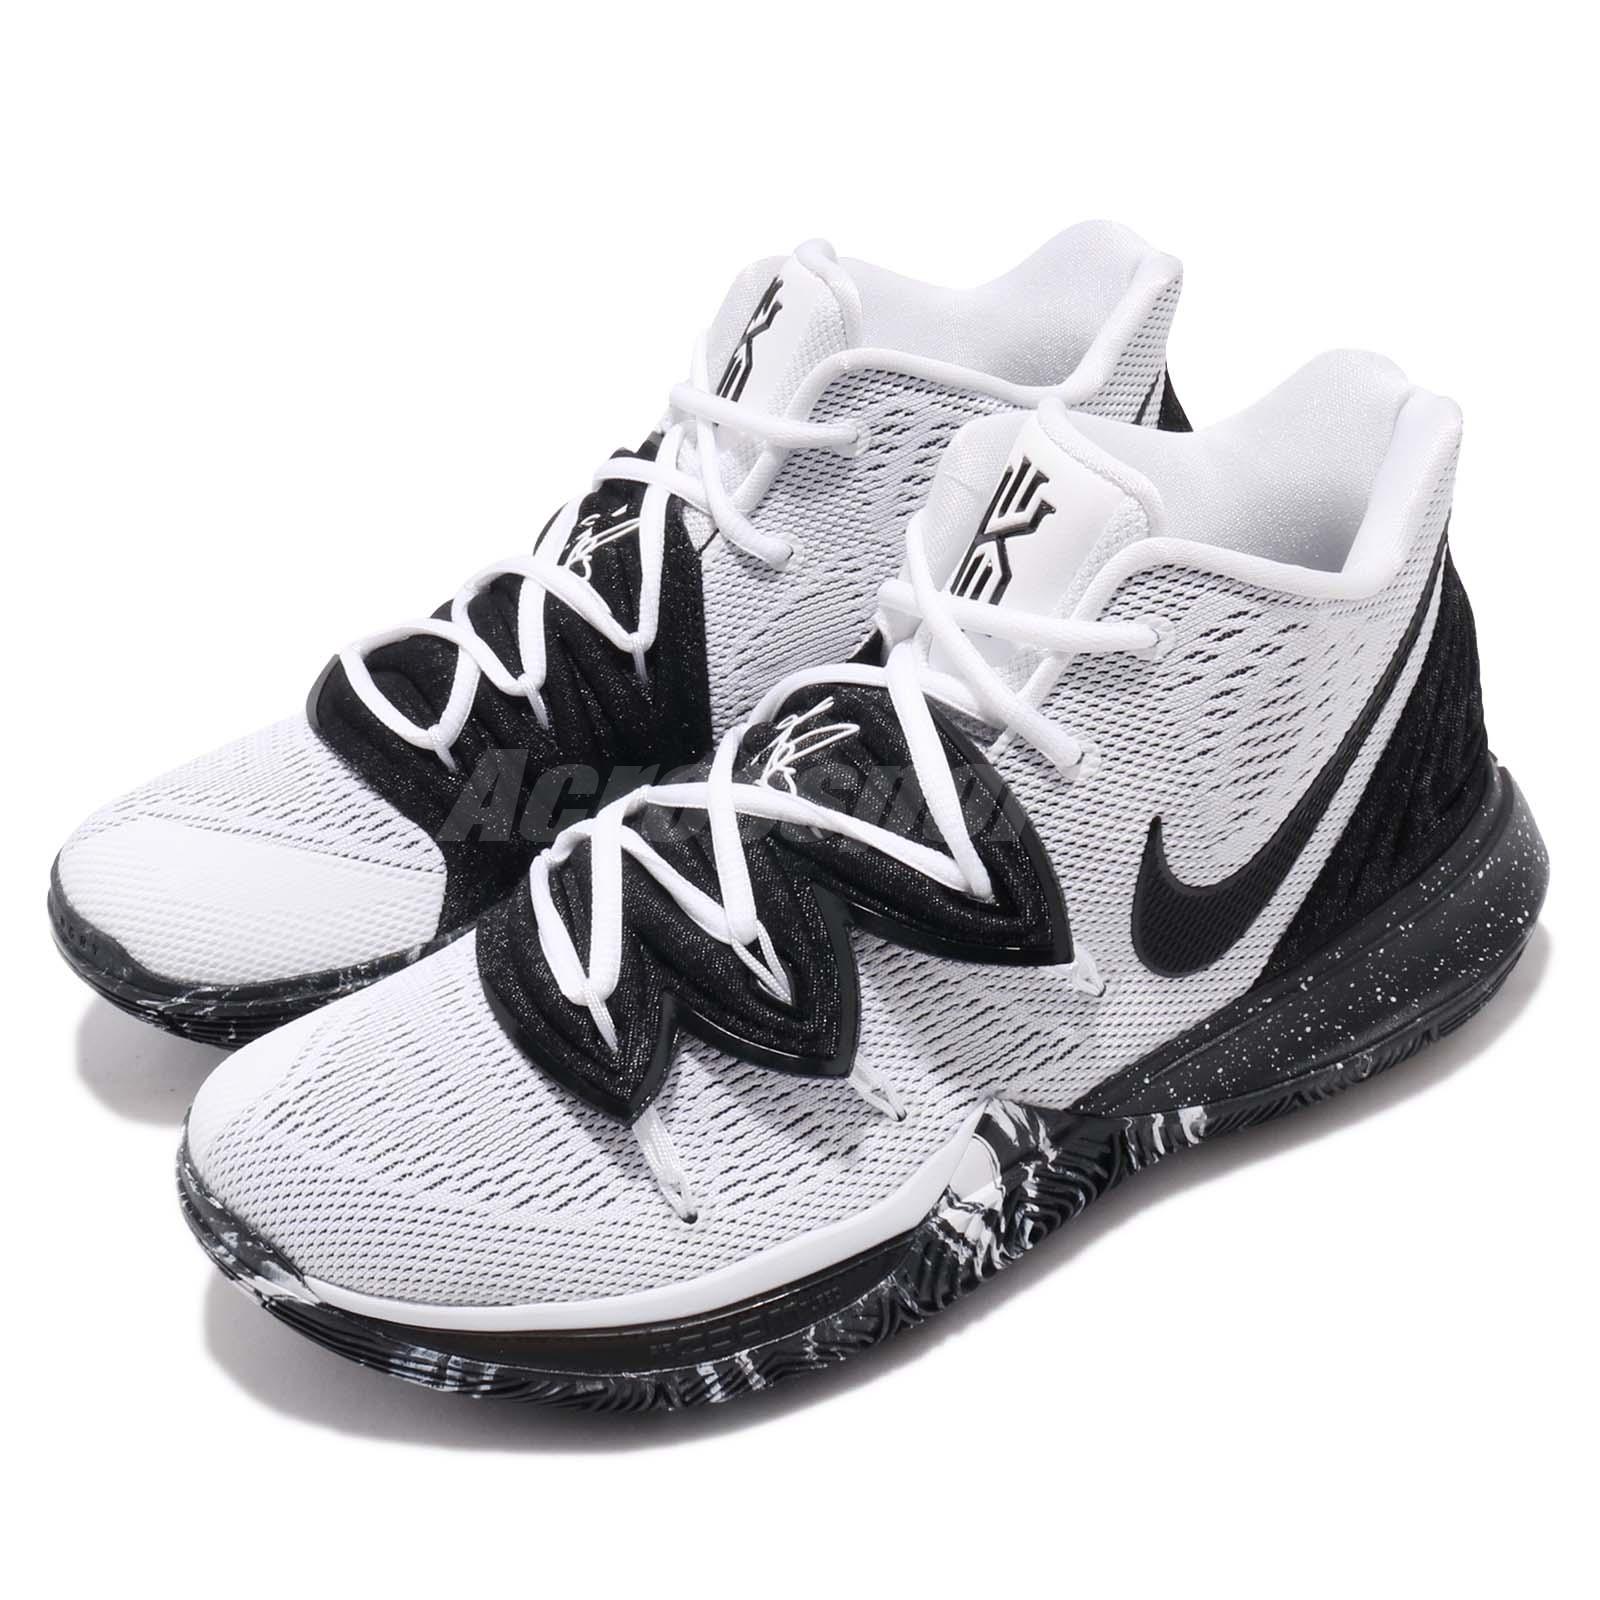 white and black basketball shoes